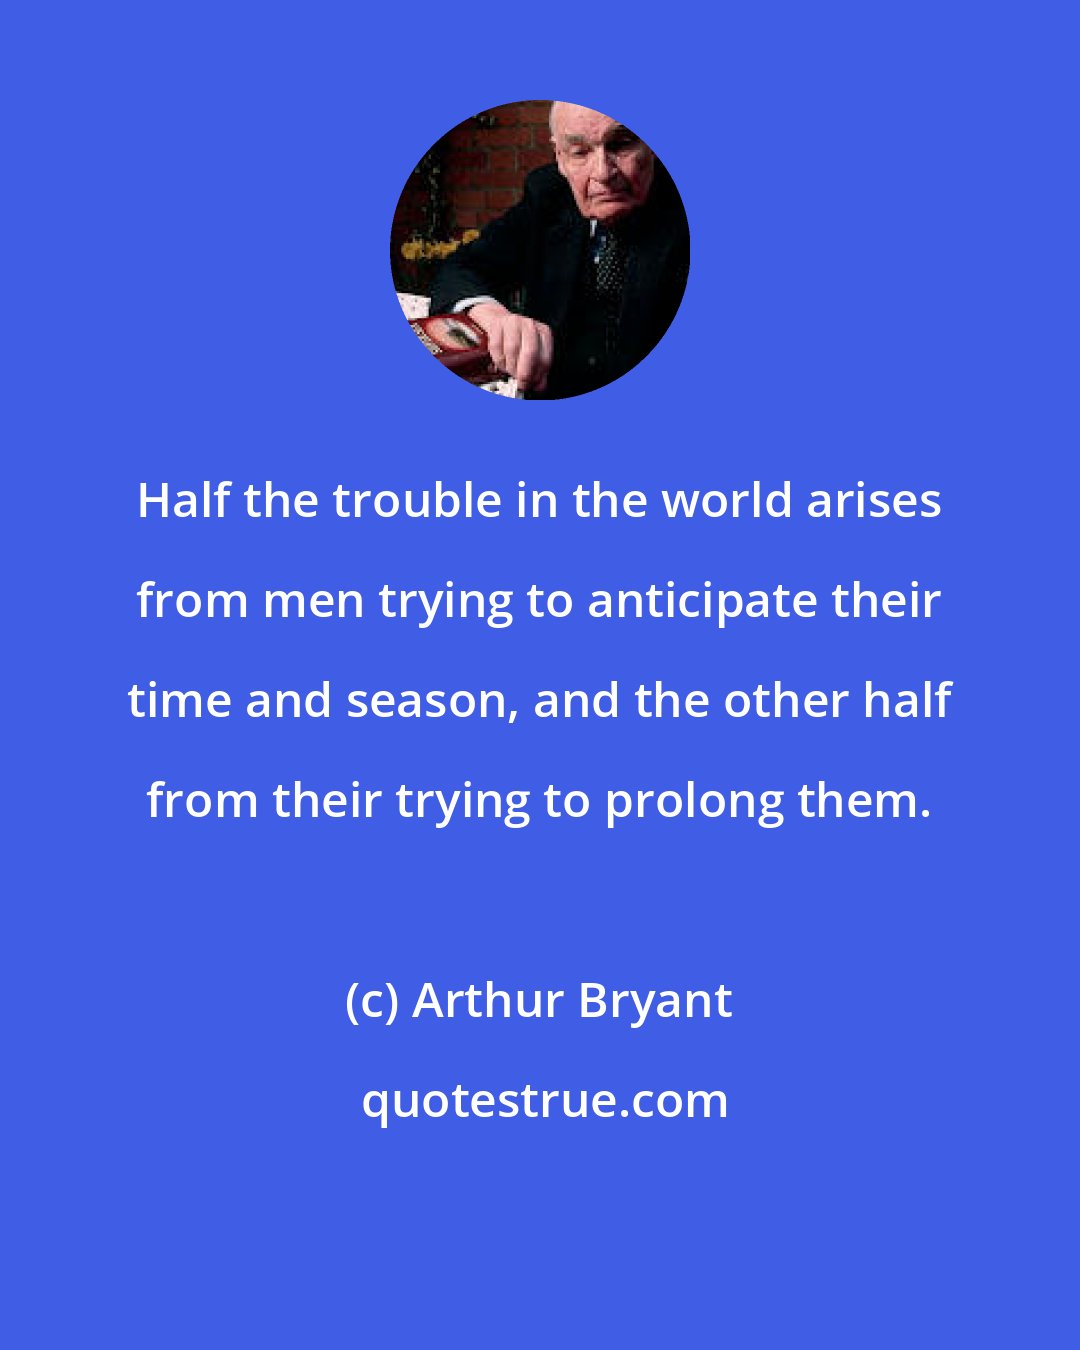 Arthur Bryant: Half the trouble in the world arises from men trying to anticipate their time and season, and the other half from their trying to prolong them.